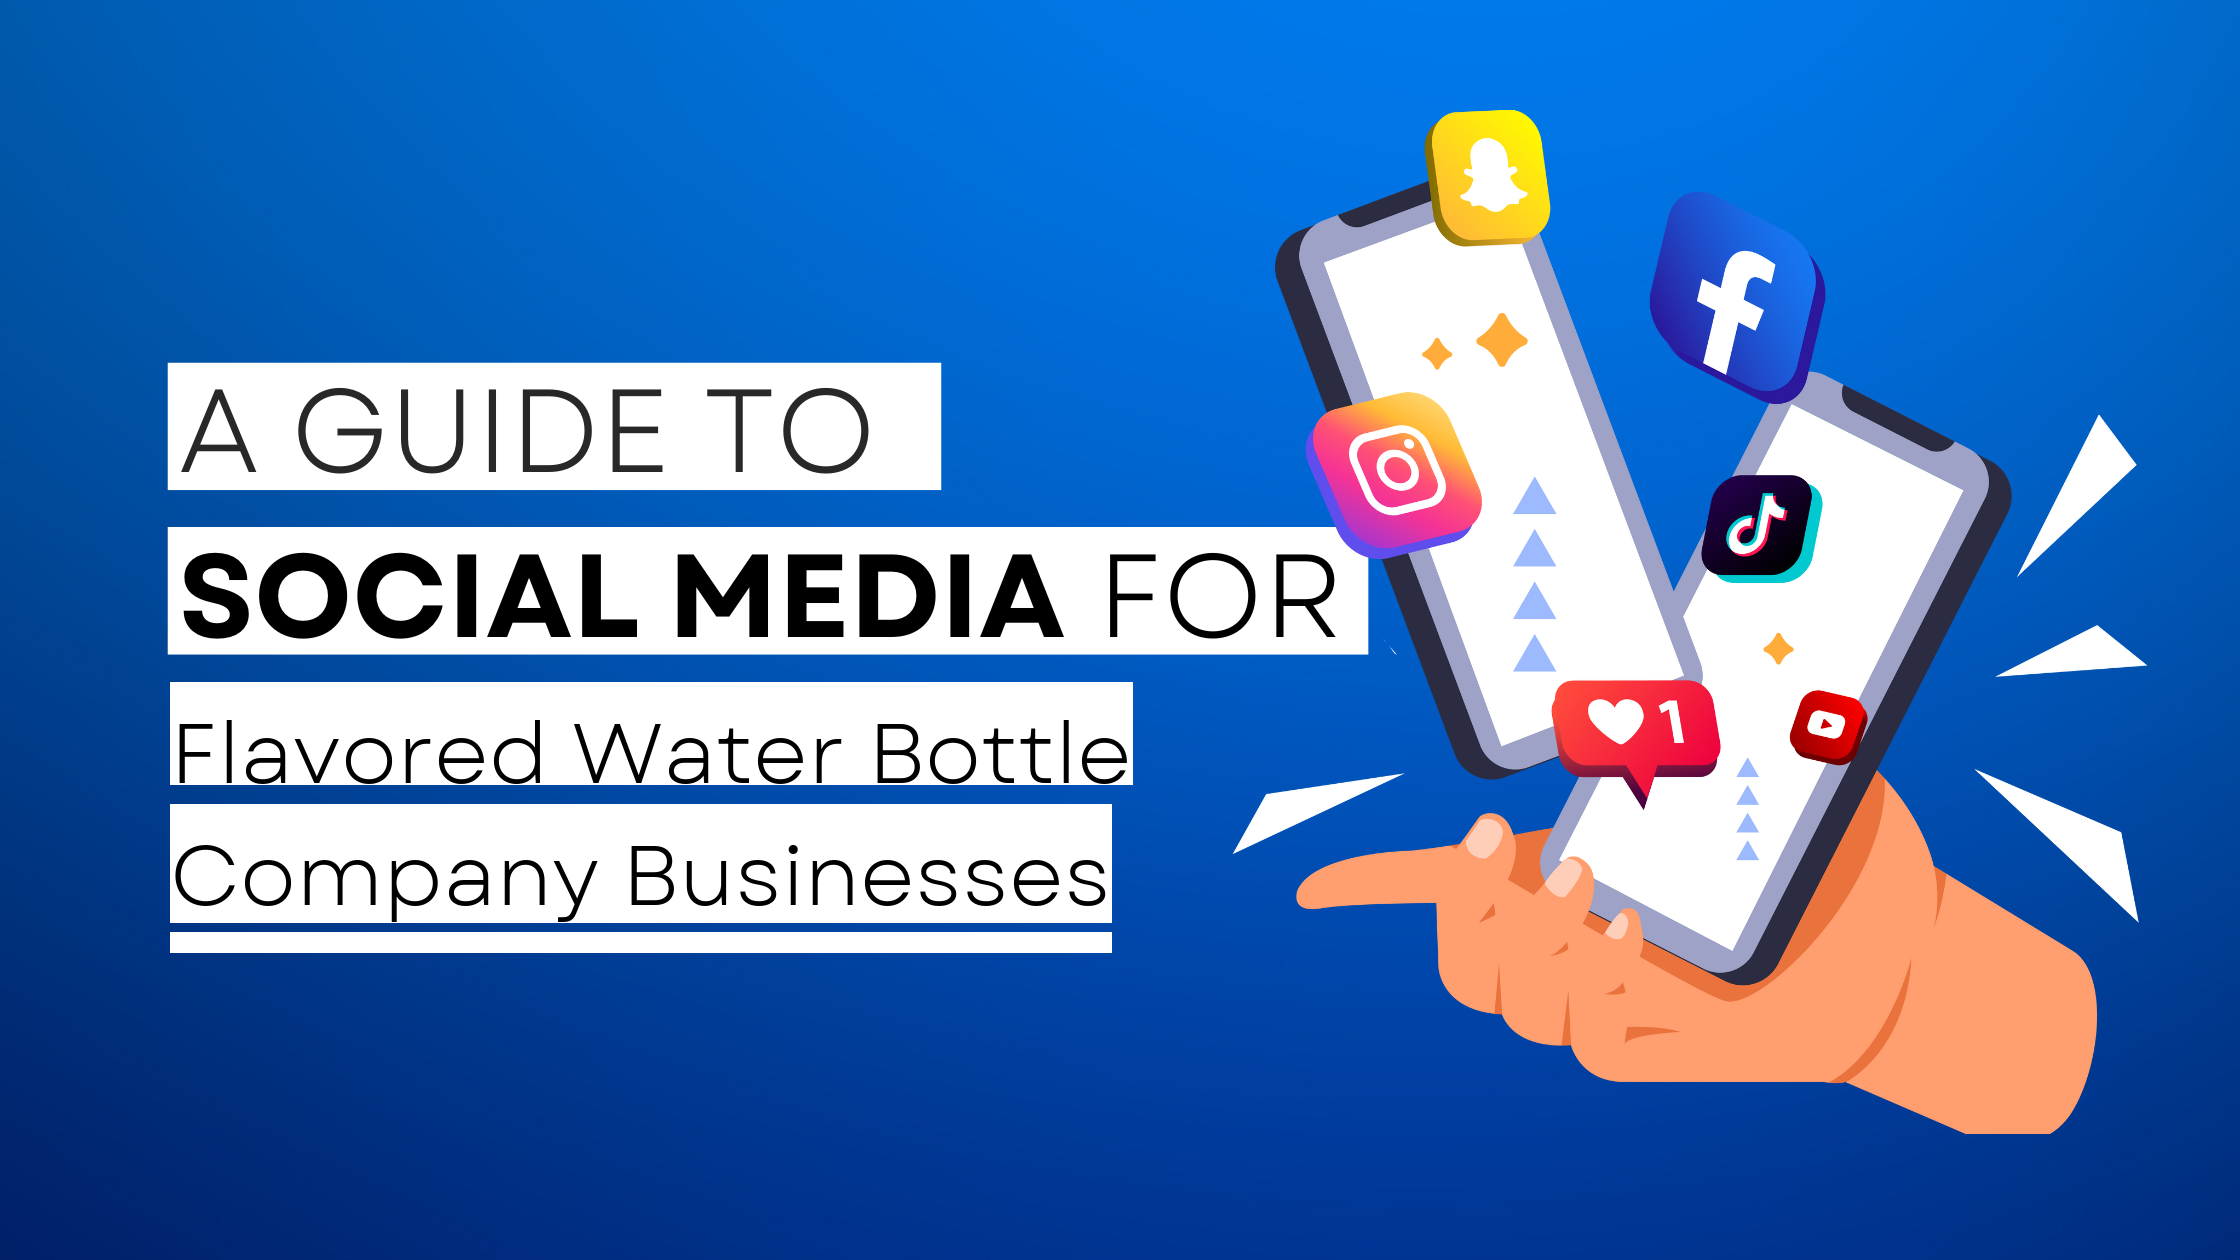 How to start Flavored Water Bottle Company on social media